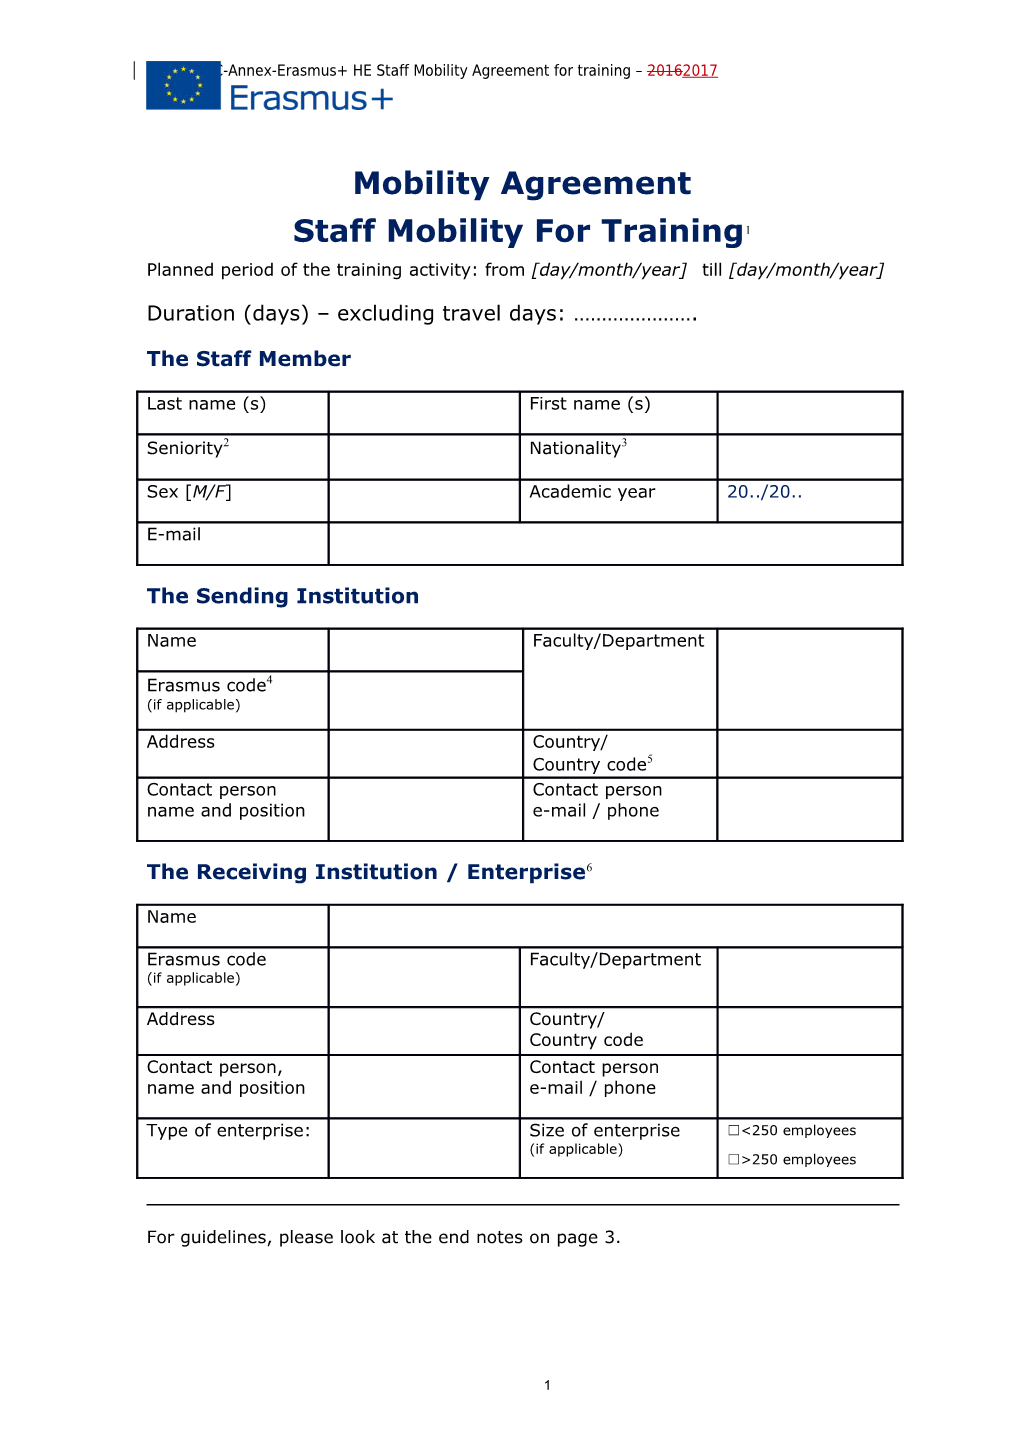 Gfna-II.7-C-Annex-Erasmus+ HE Staff Mobility Agreement for Training 20162017